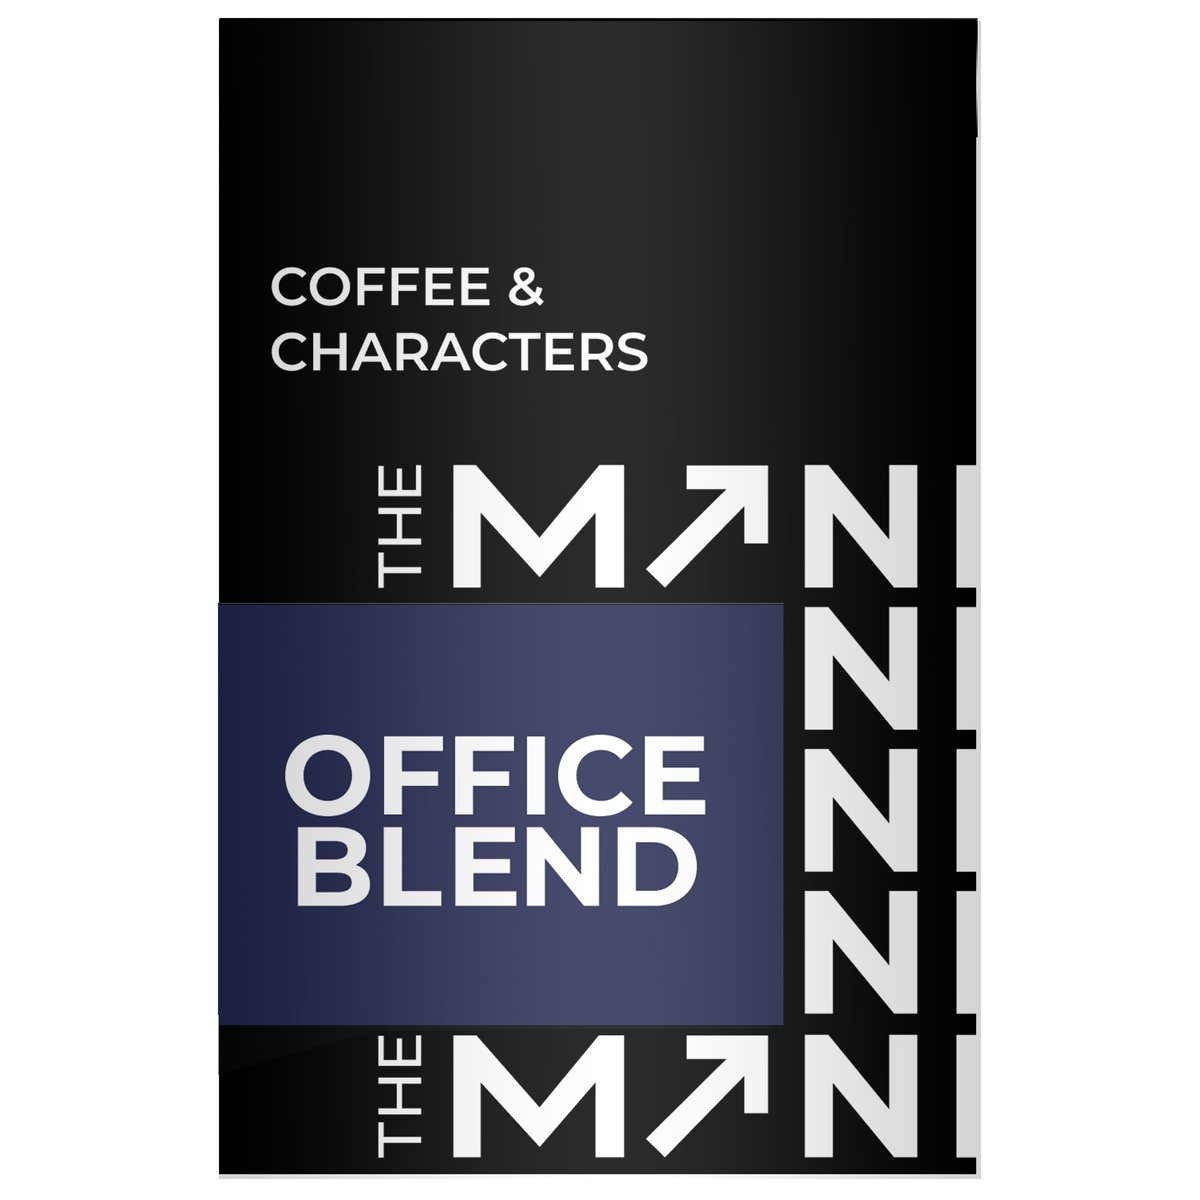 The Miners Office Blend